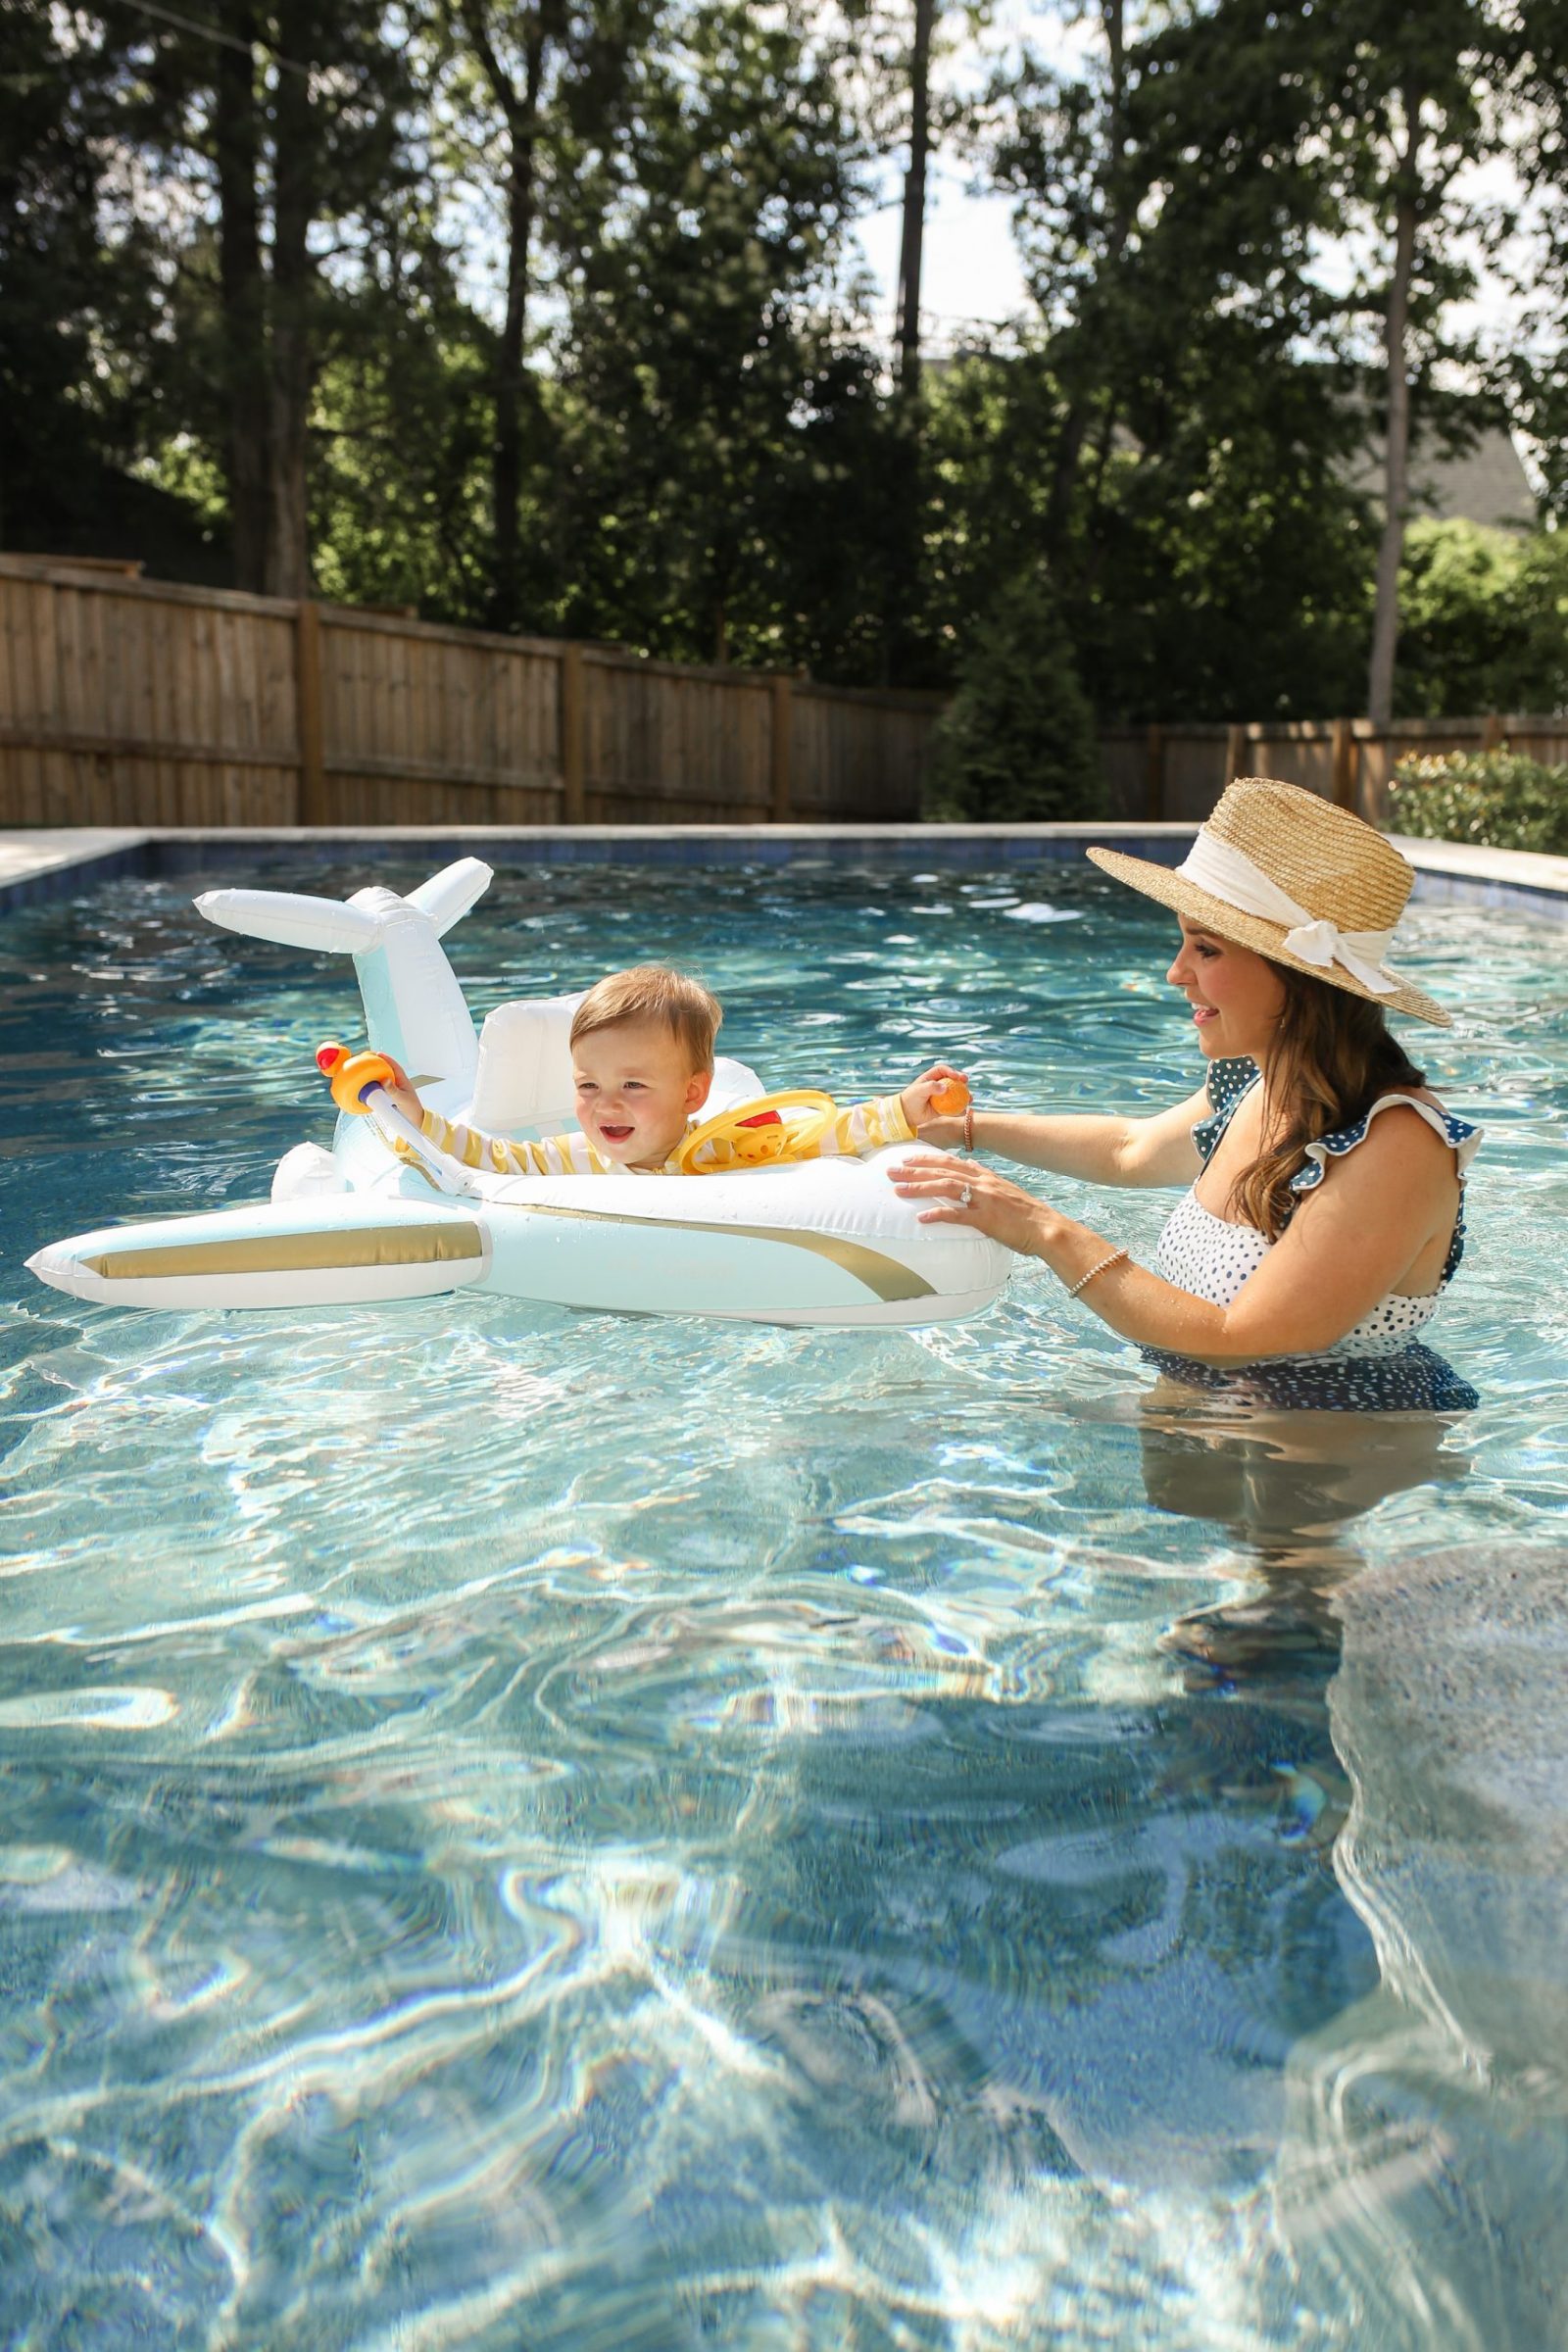 funbaby pool floats